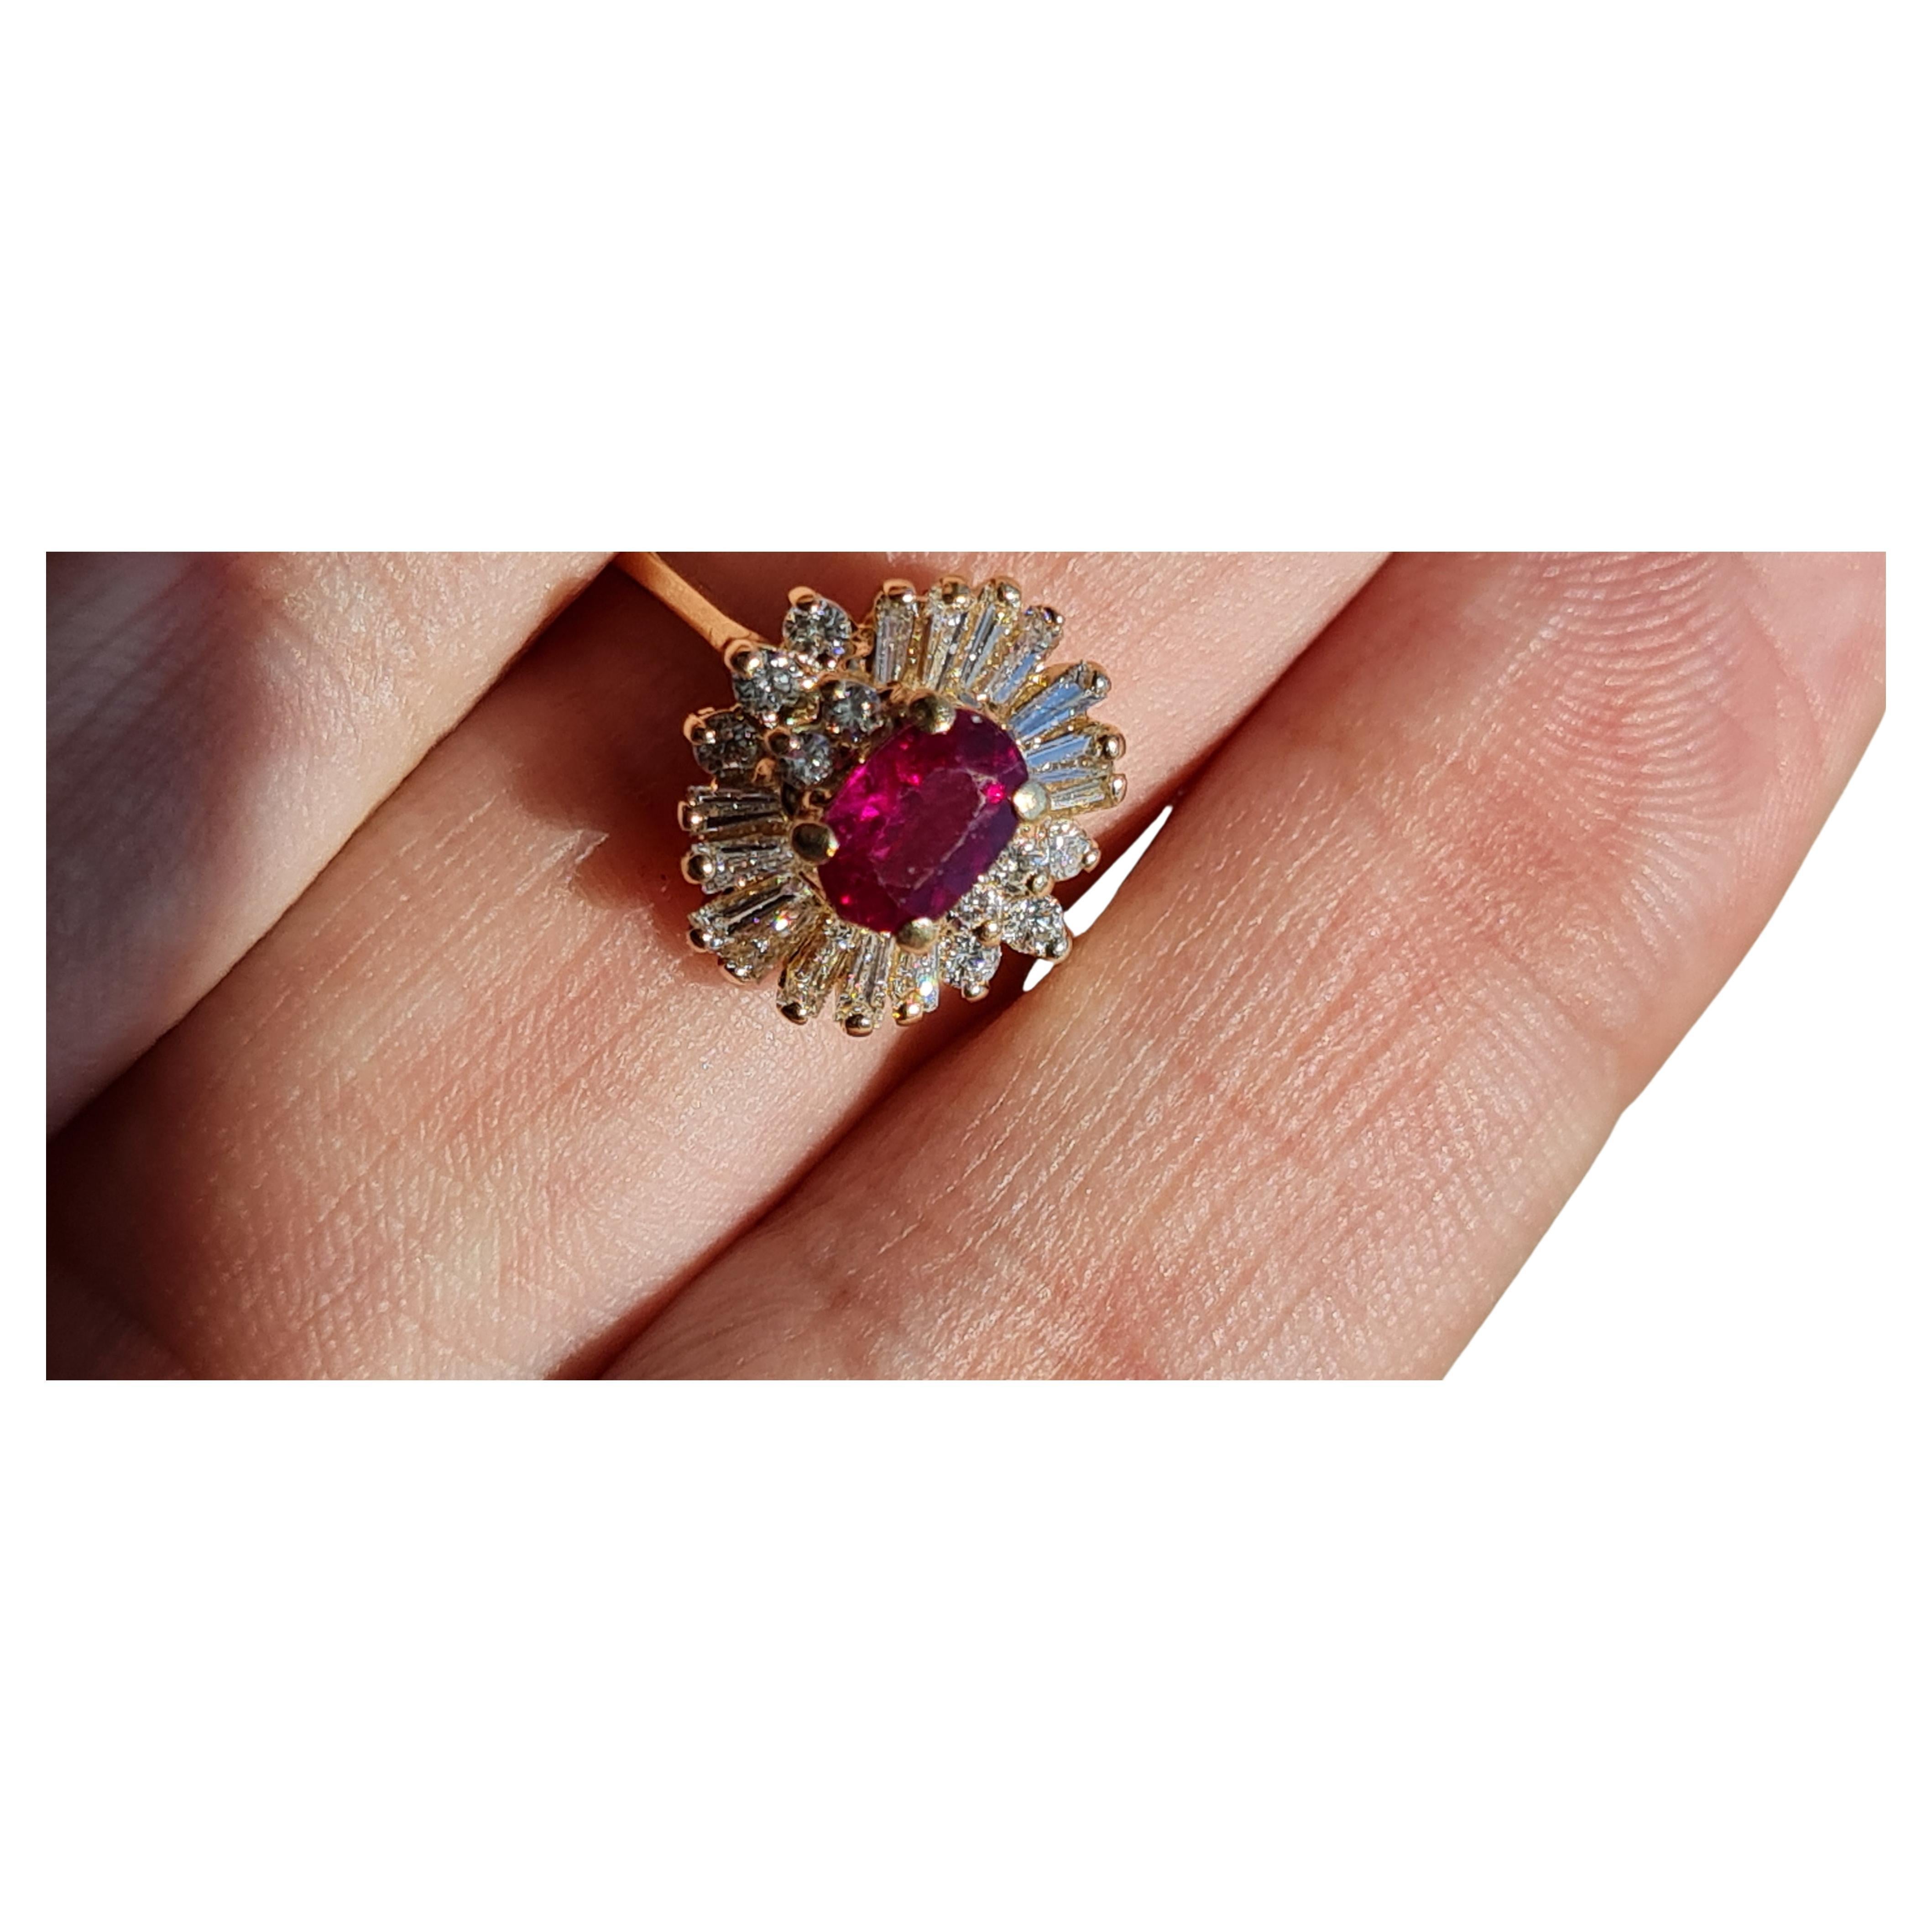 Offered is a 14K Yellow Gold Ruby and Diamond Ballerina Ring by Exquisite.  The ring features a 6x4mm oval shape 1/2ct Ruby.  The Ballerina setting is accented with Ten Round Diamonds and Fourteen Tapered Baguette Diamonds adding 1/2tdw ~ GIA